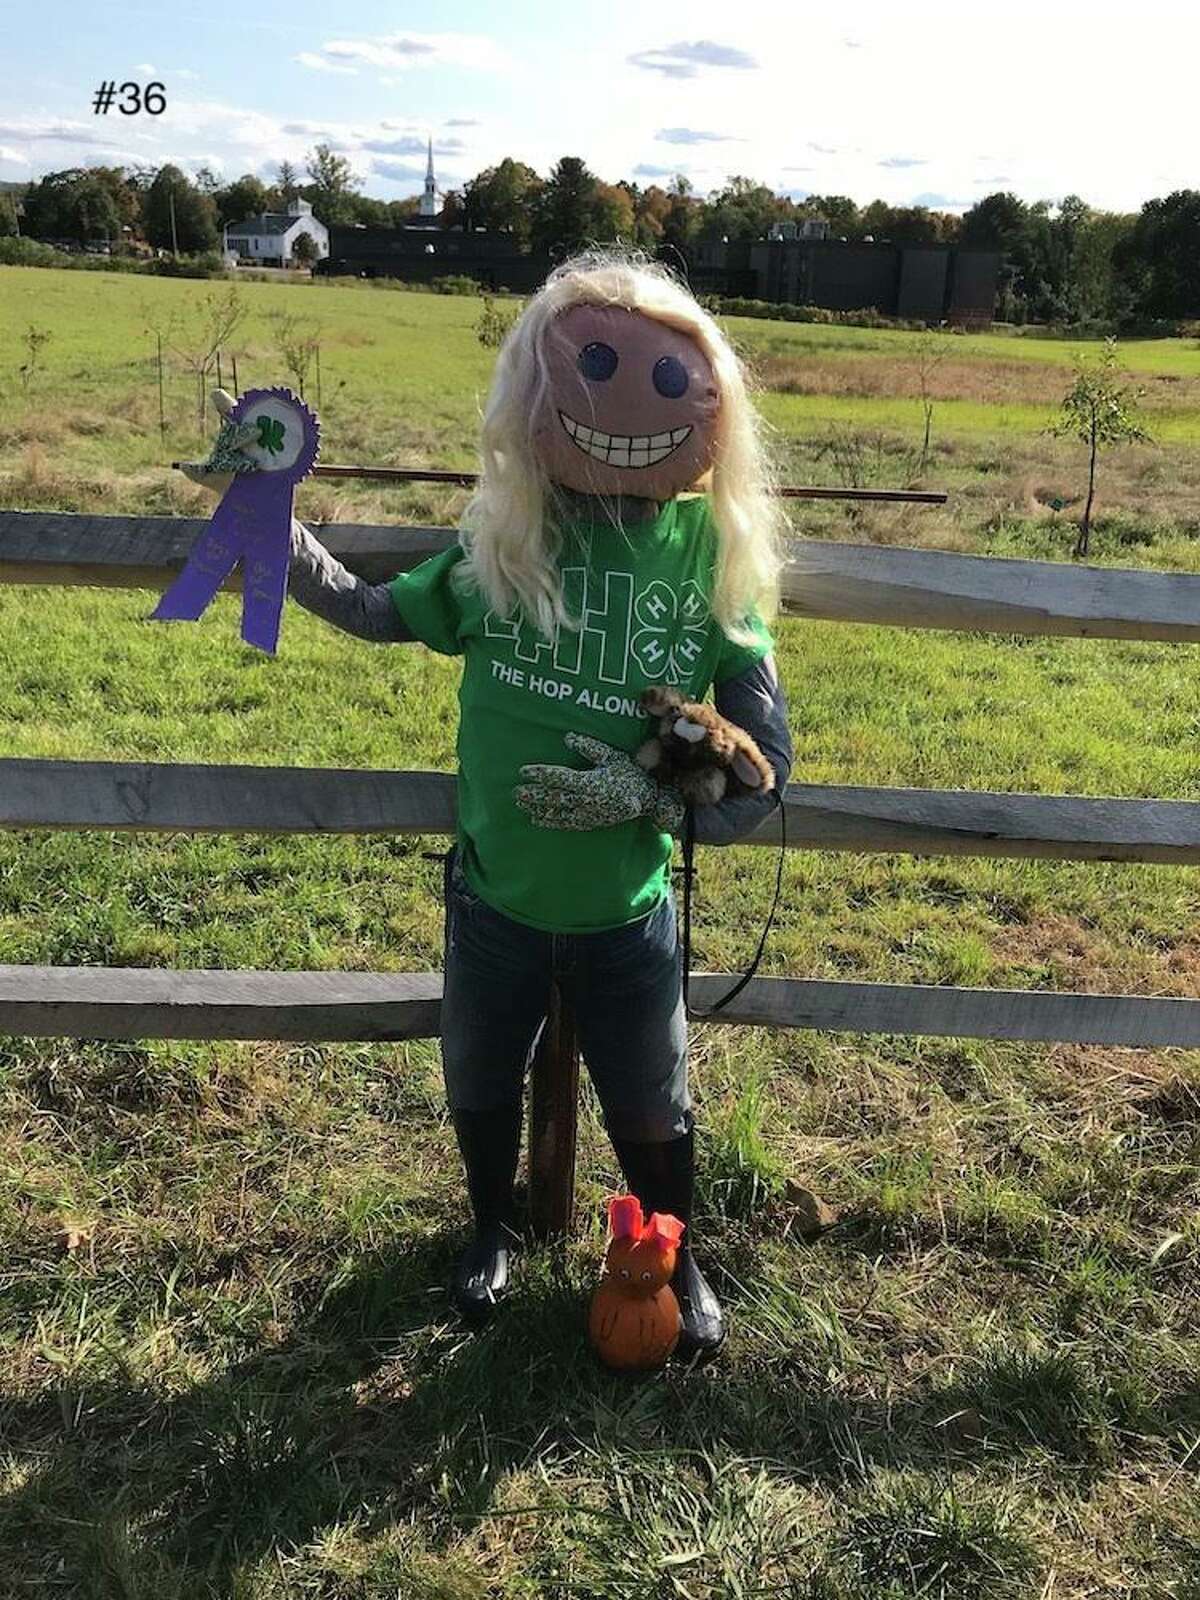 One of the characters inhabiting a fence spot at the Strong Family Farm's 9th Annual Scarecrow Contest.